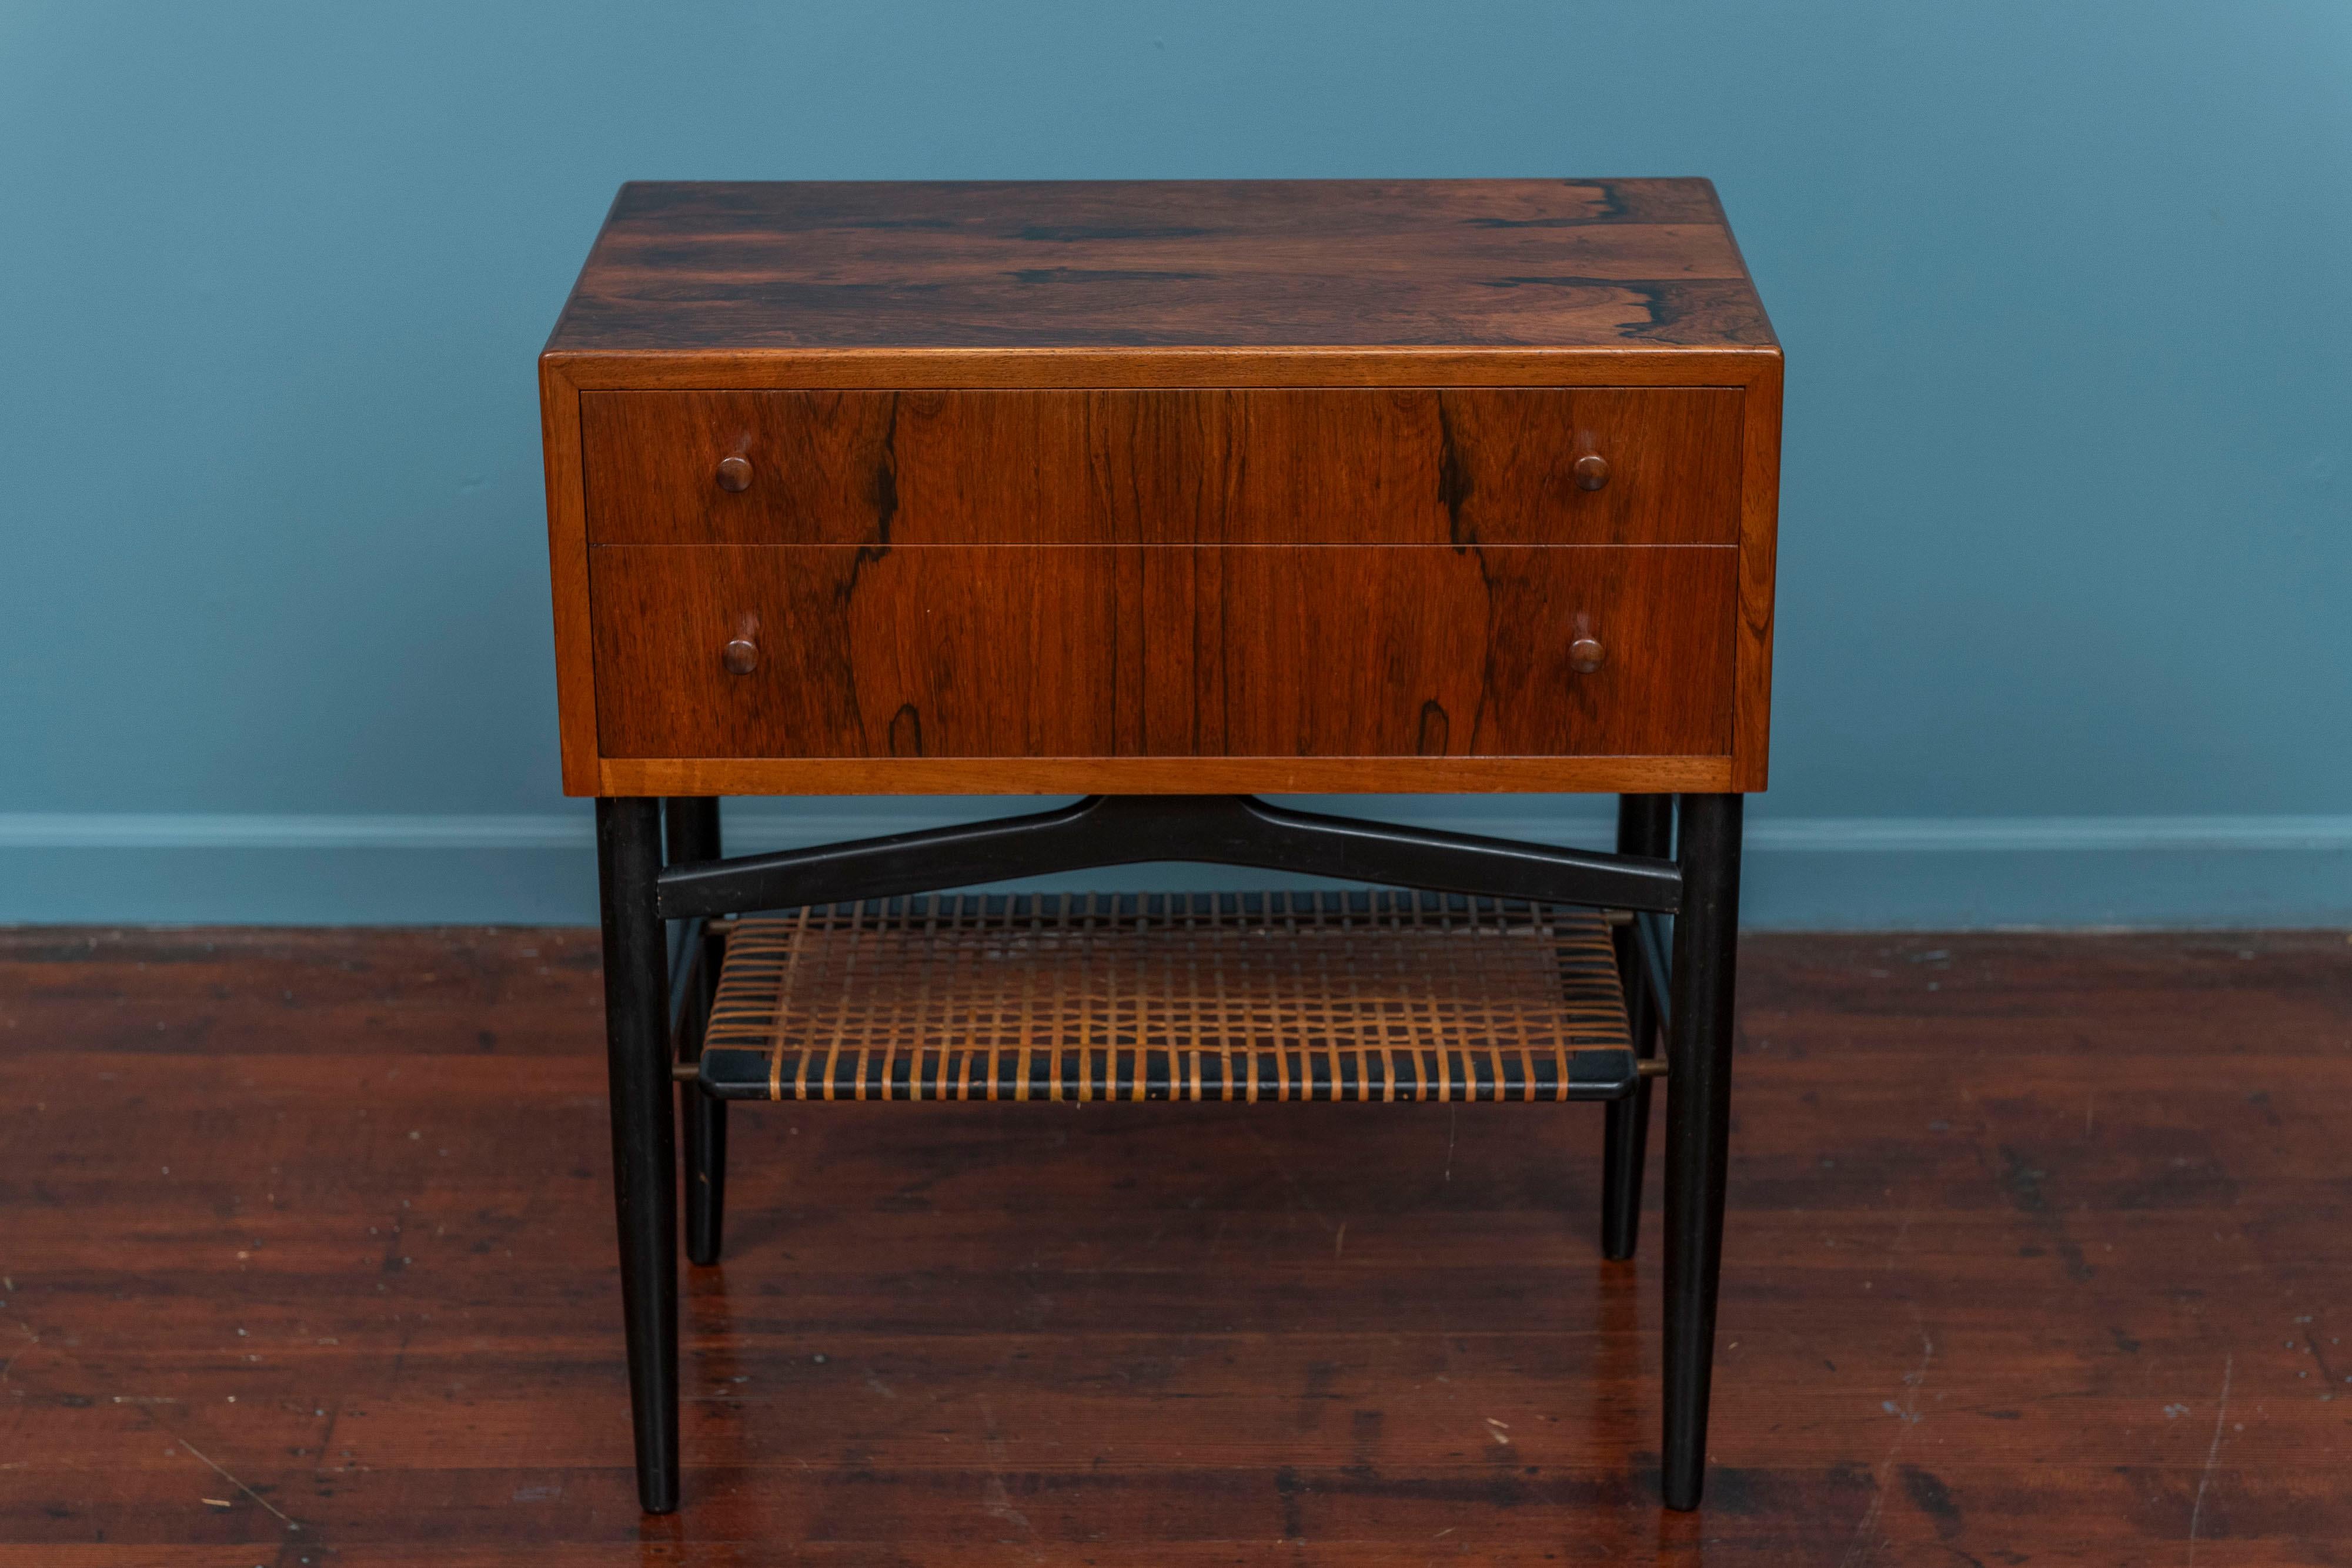 Scandinavian Modern rosewood console or small cabinet. Beautiful rosewood grain throughout two drawer cabinet on an ebonized and cane base. High quality construction and attention to detail, ready to install and enjoy.